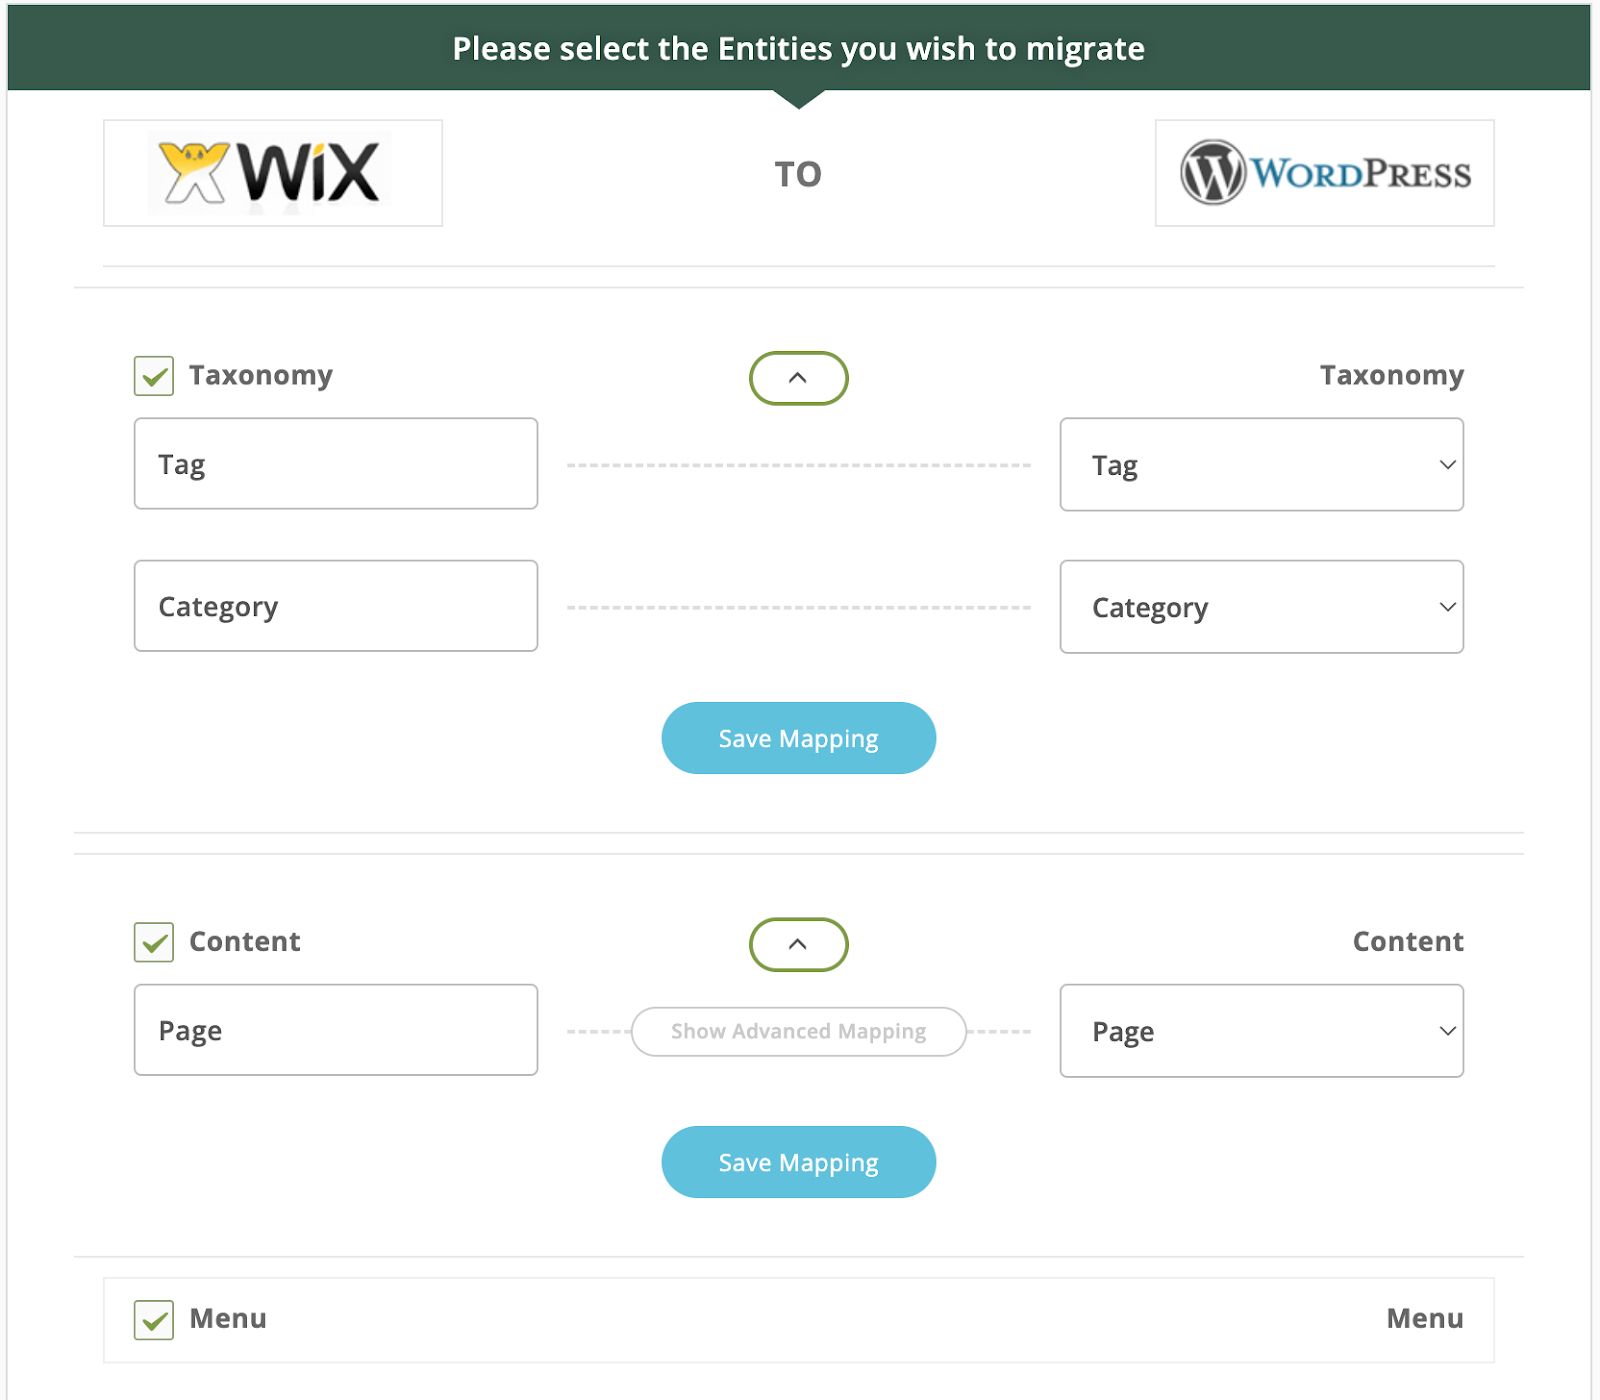 You will need to select the items you want transferred from Wix to WordPress.